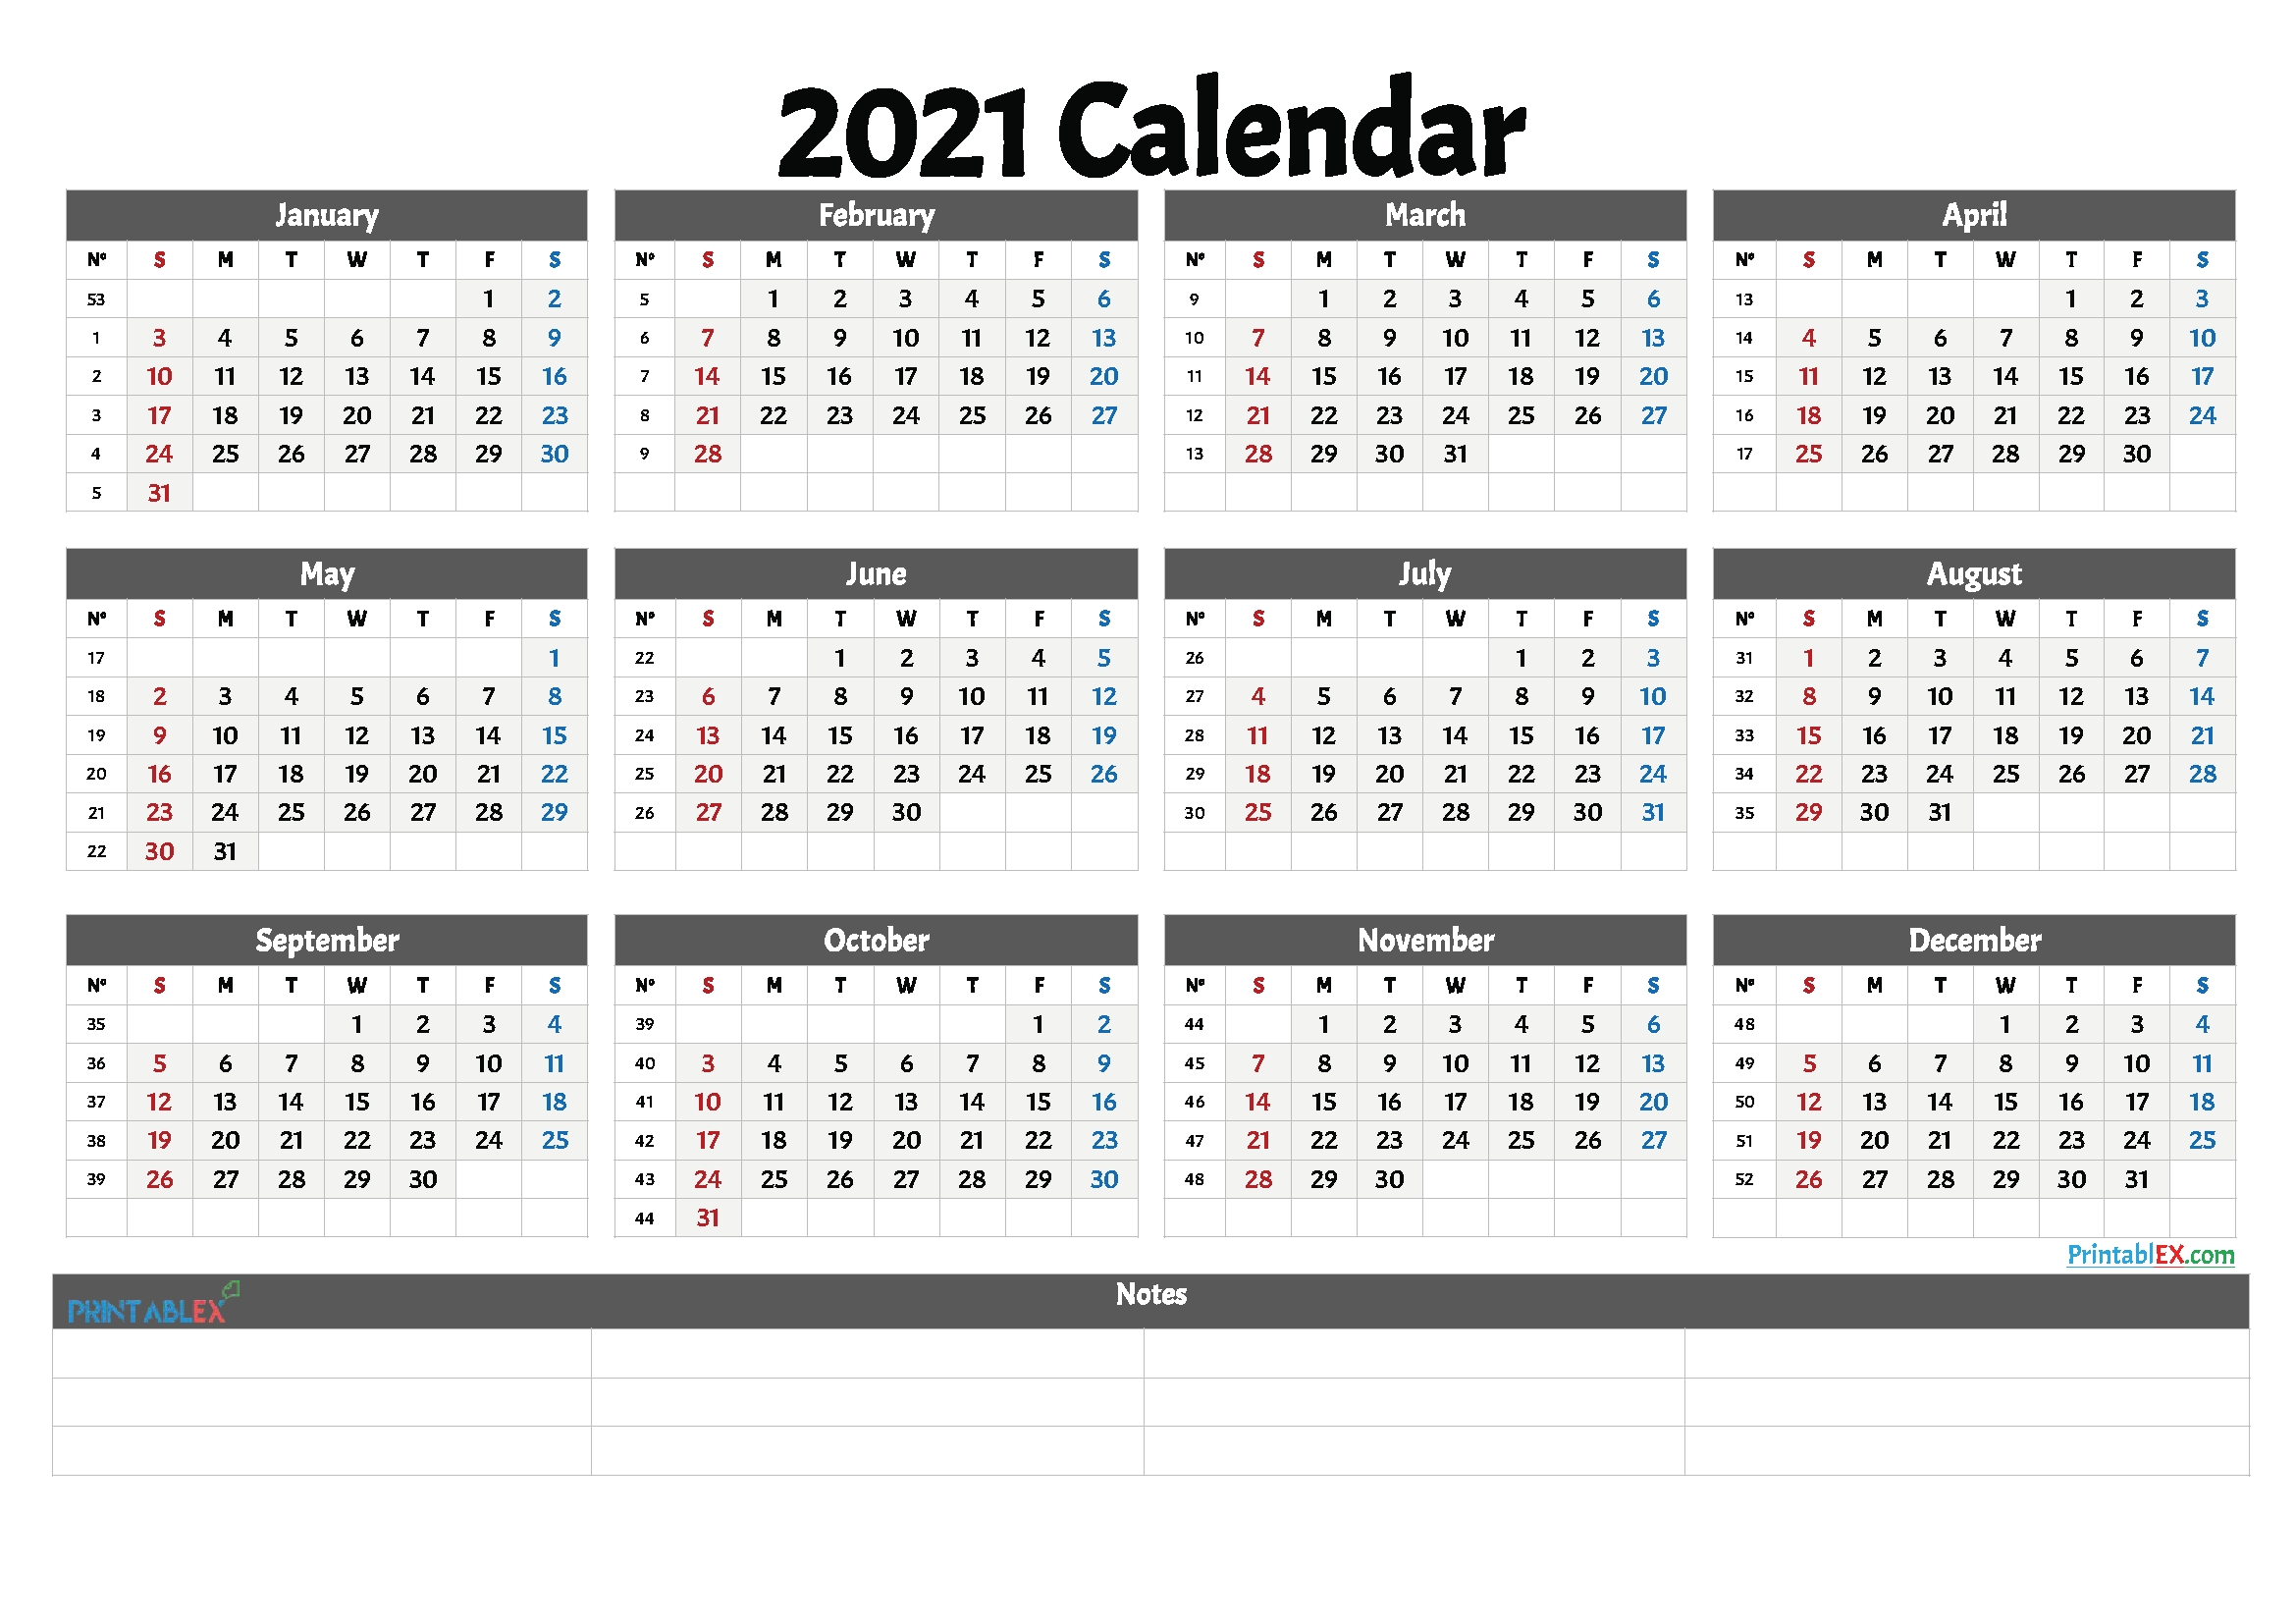 2021 Calendar Template With Numbered Weeks - Example ...